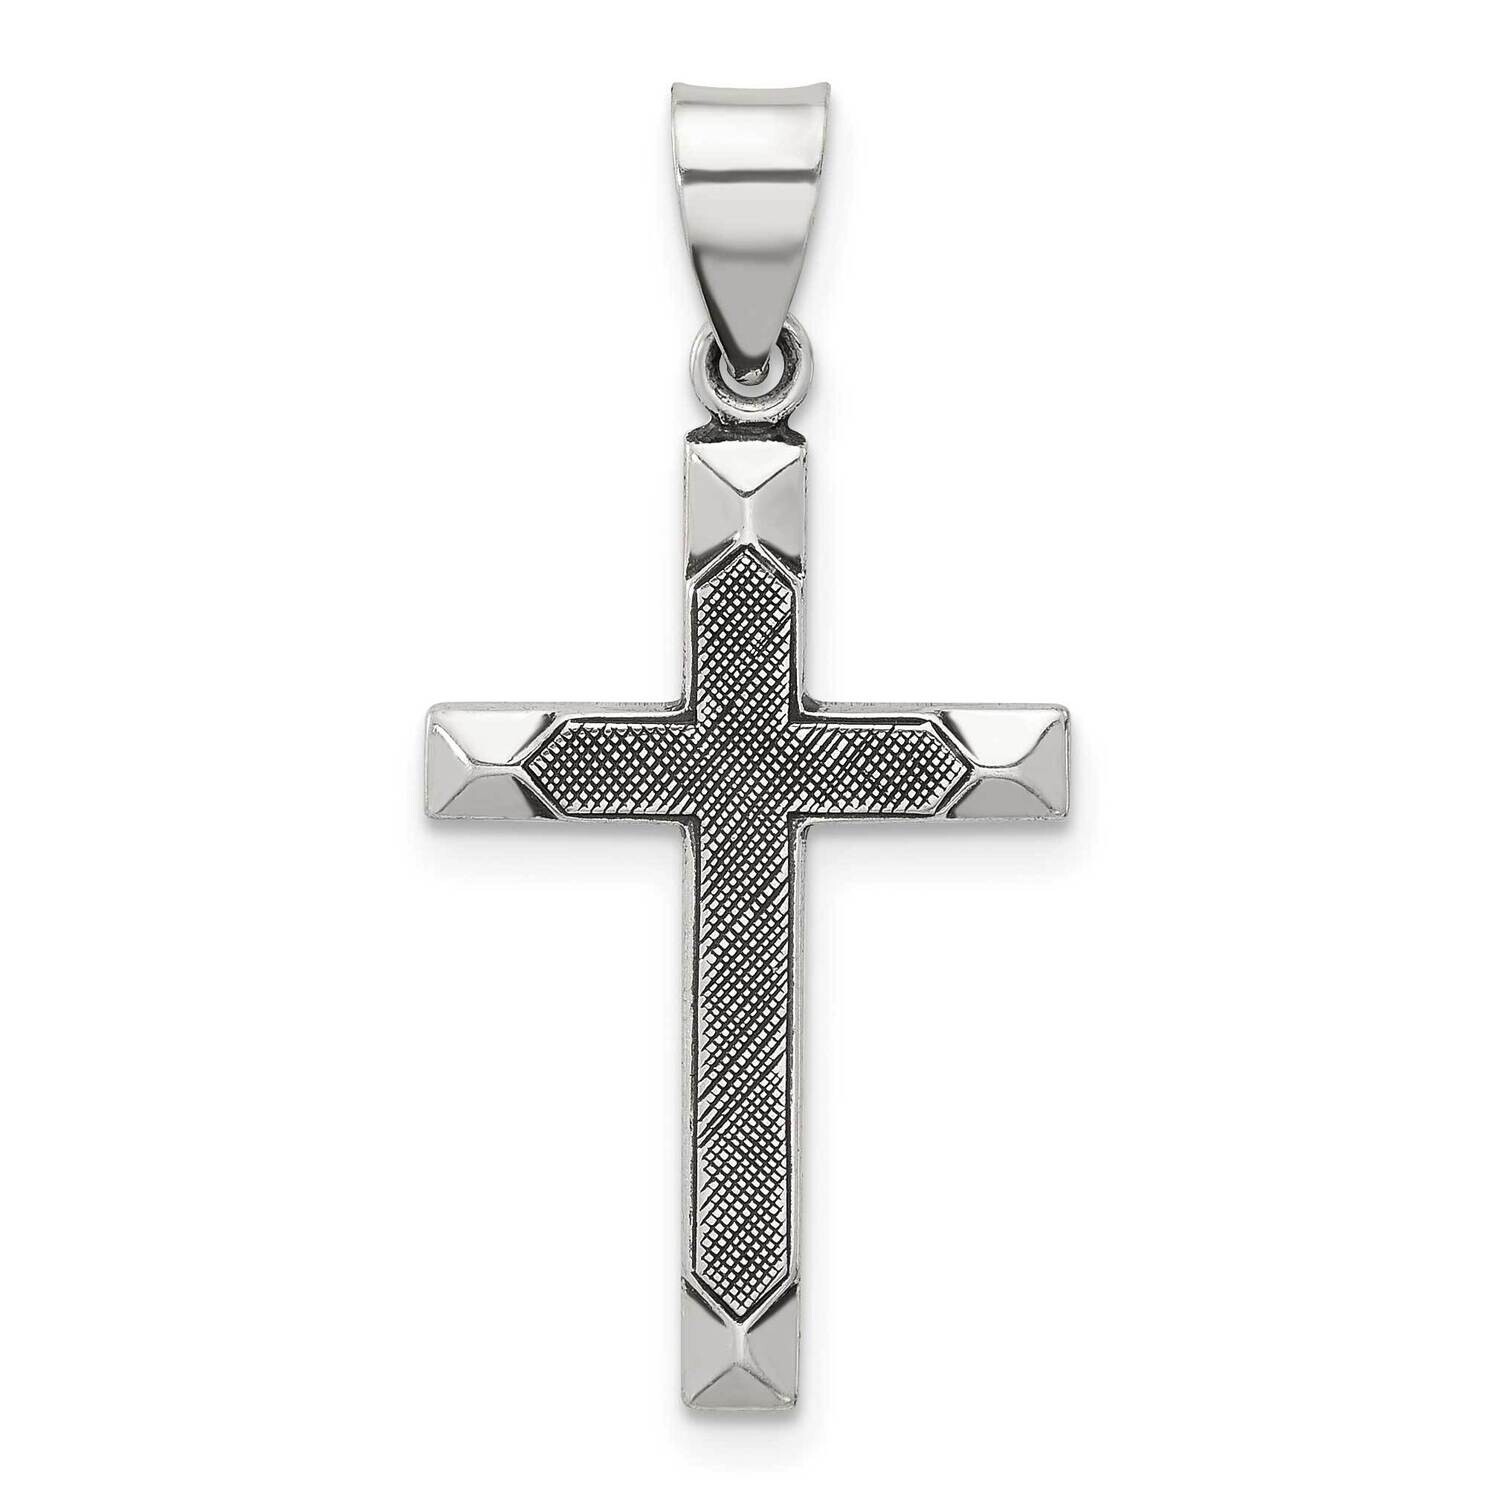 Antiqued Solid Textured Cross Pendant Sterling Silver QC11394